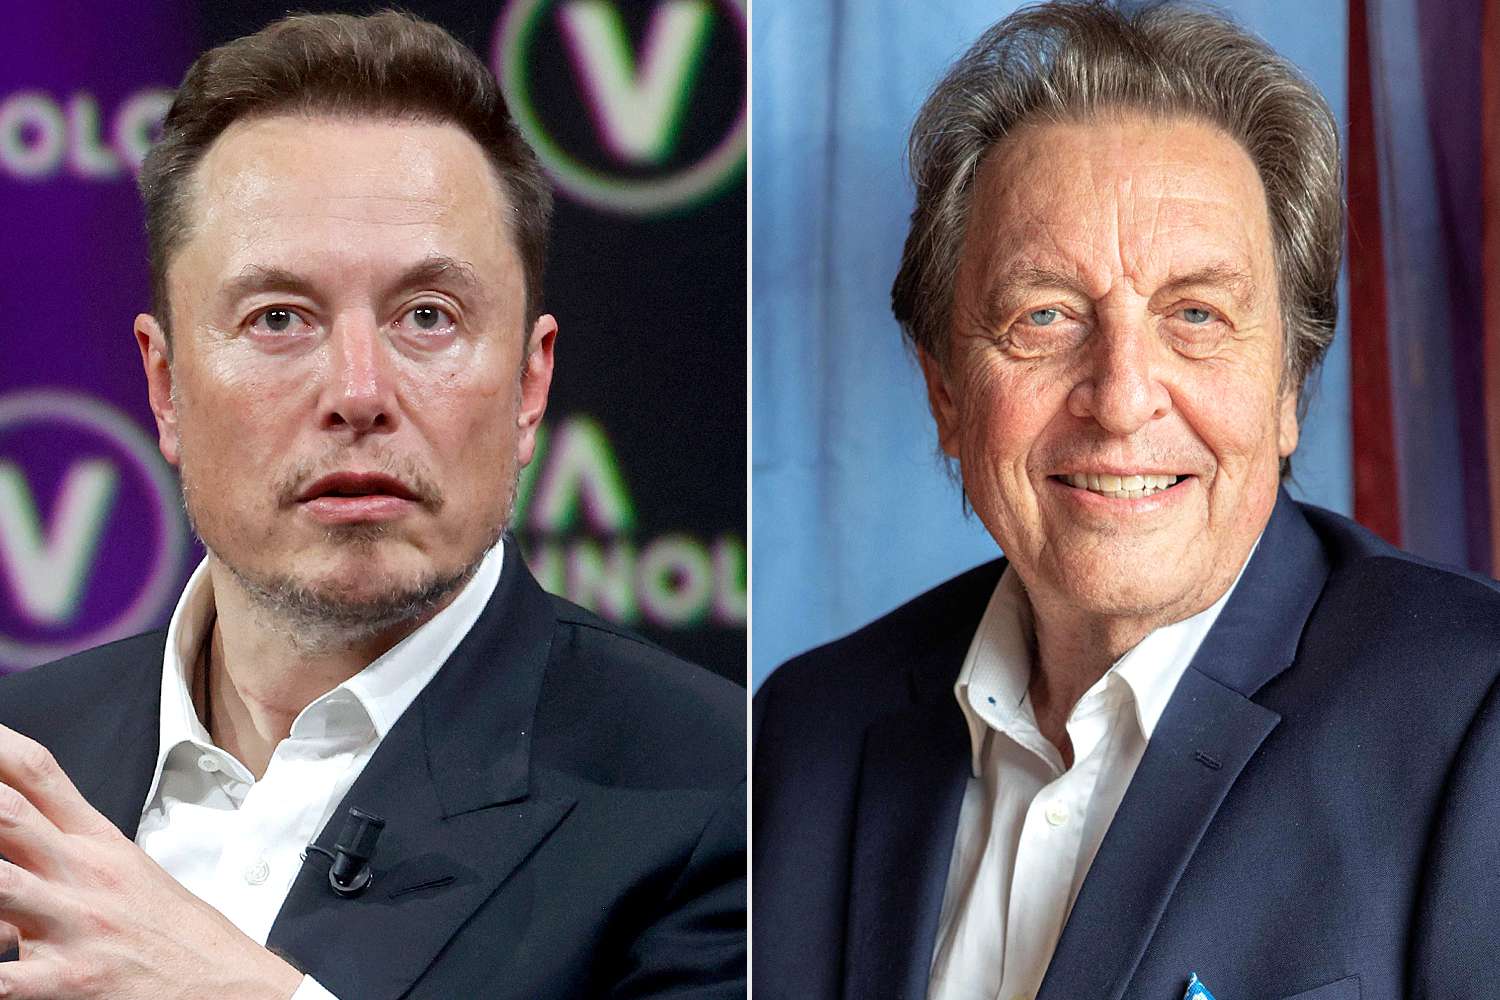 Elon Musk Is Taking His Three-Year-Old Child on a Global Tour, but Why?